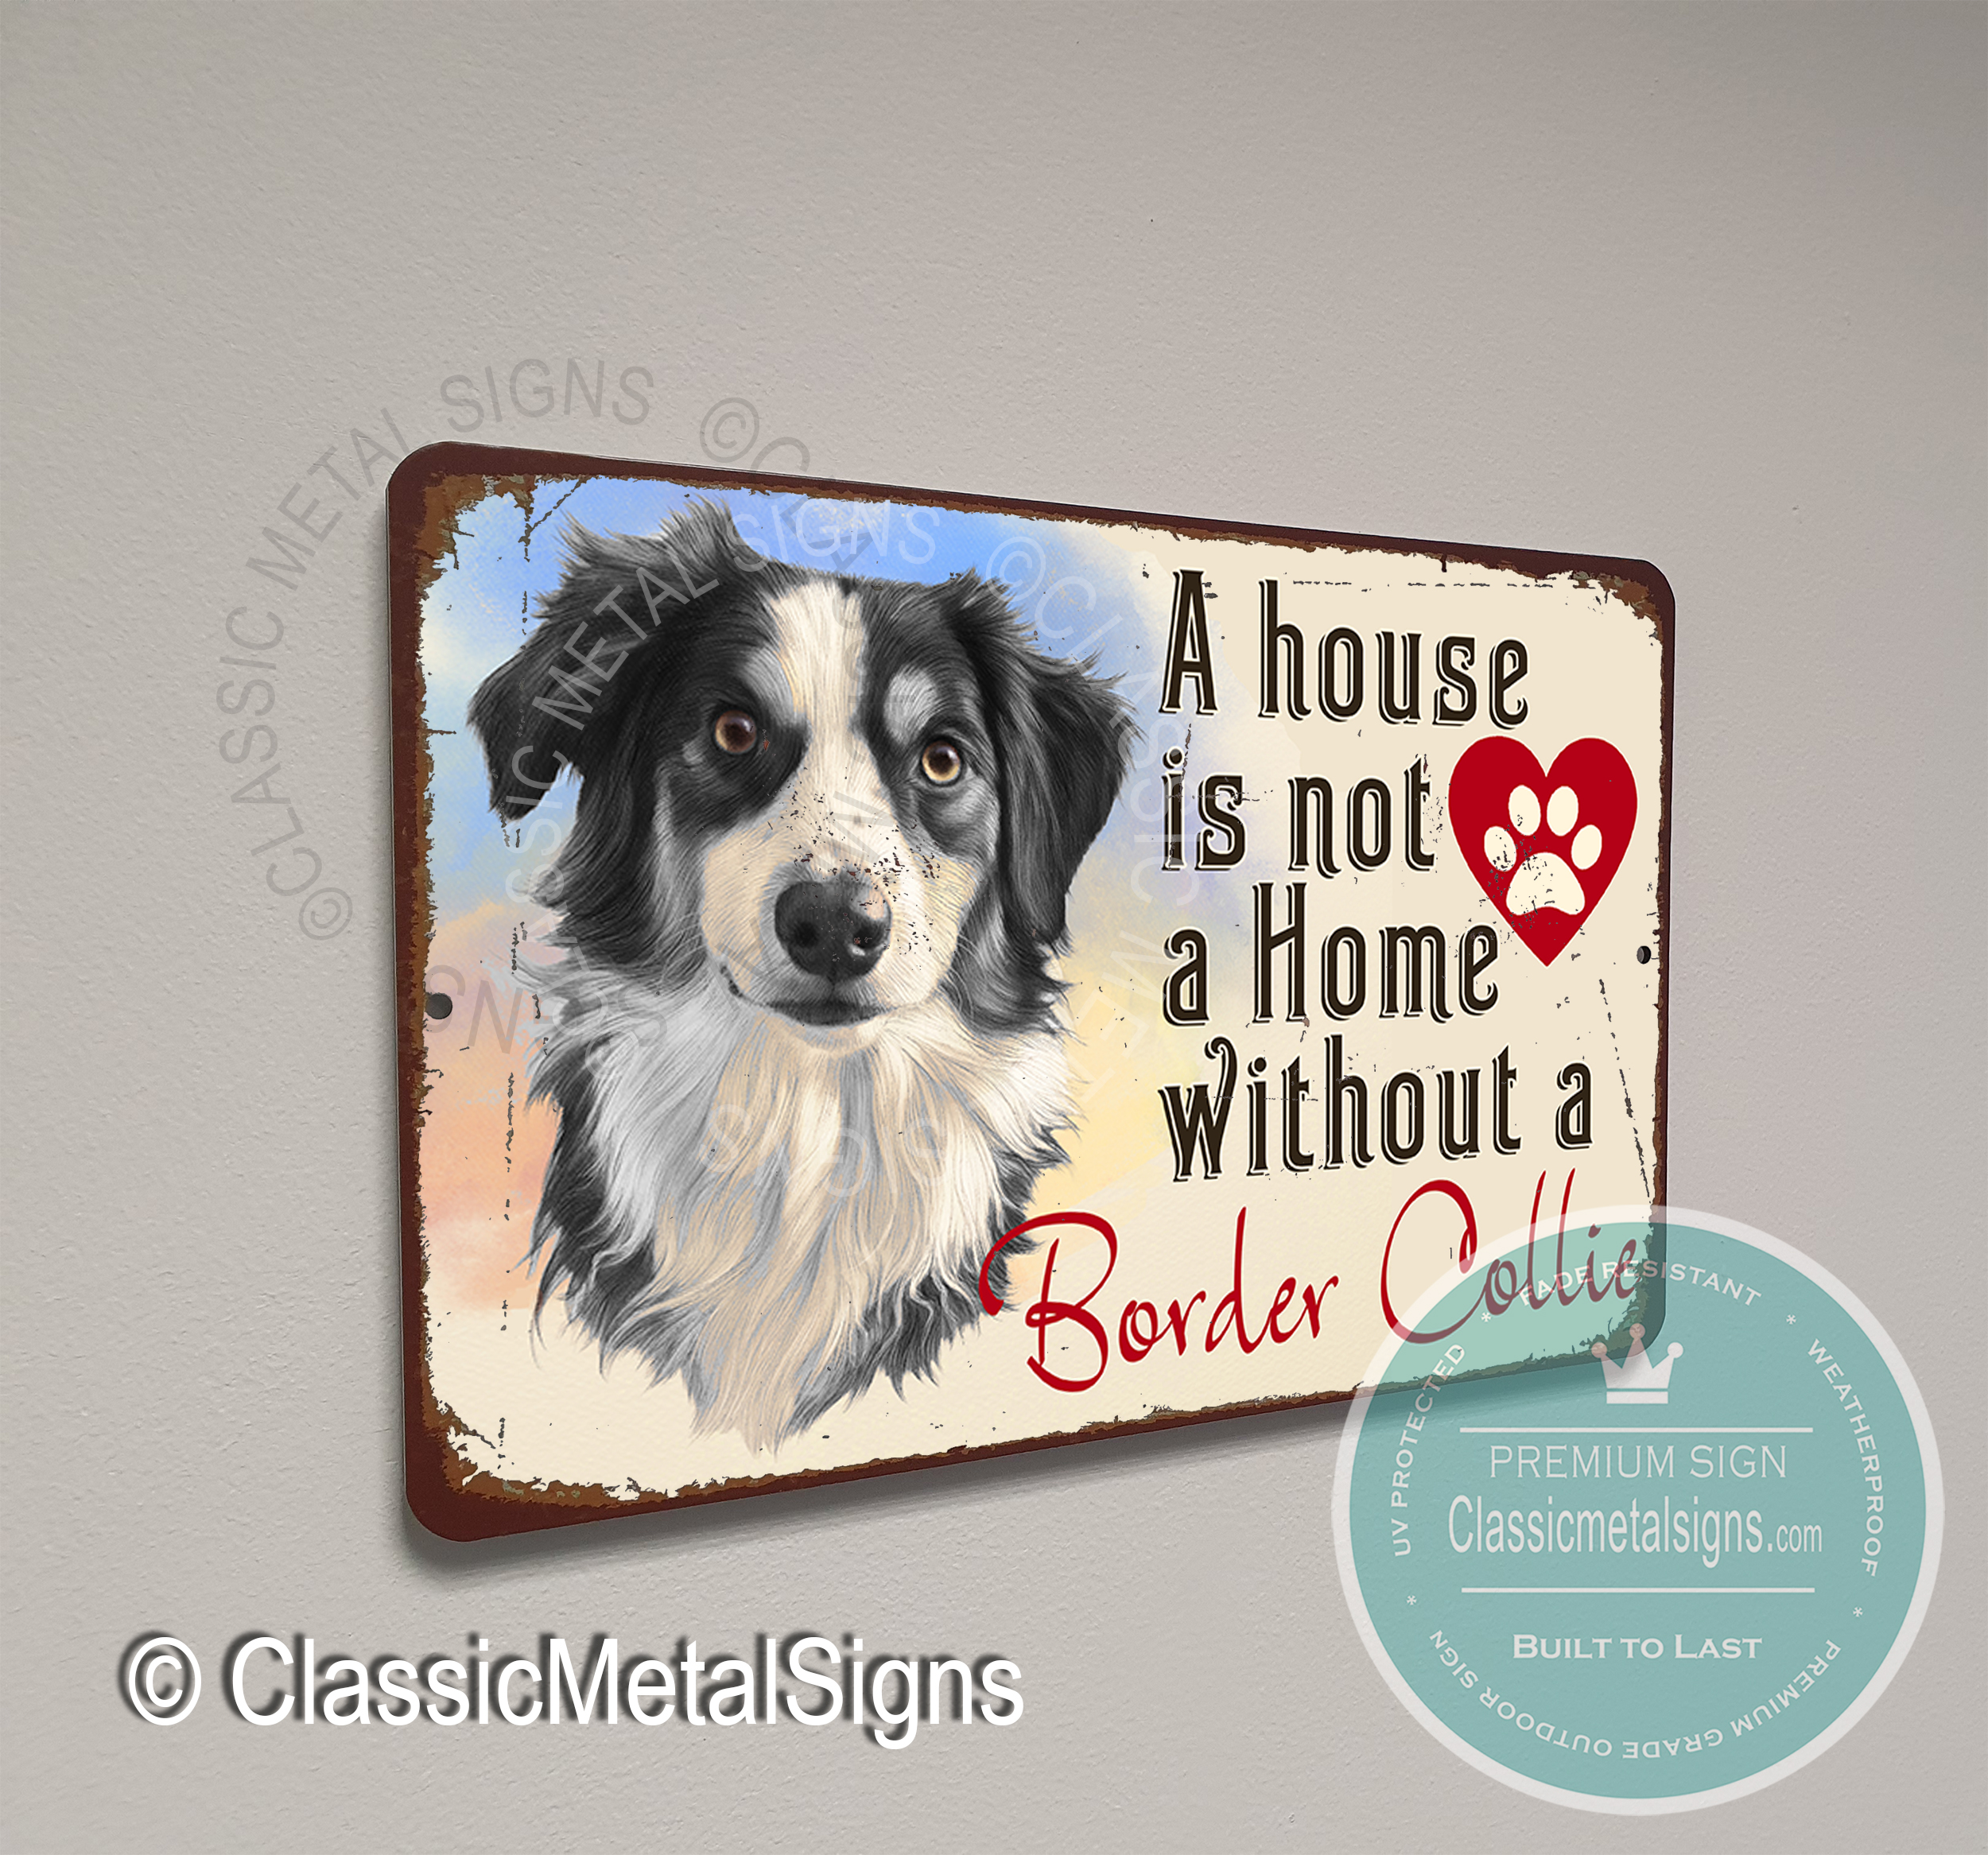 A House is not a home without a Border Collie Signs